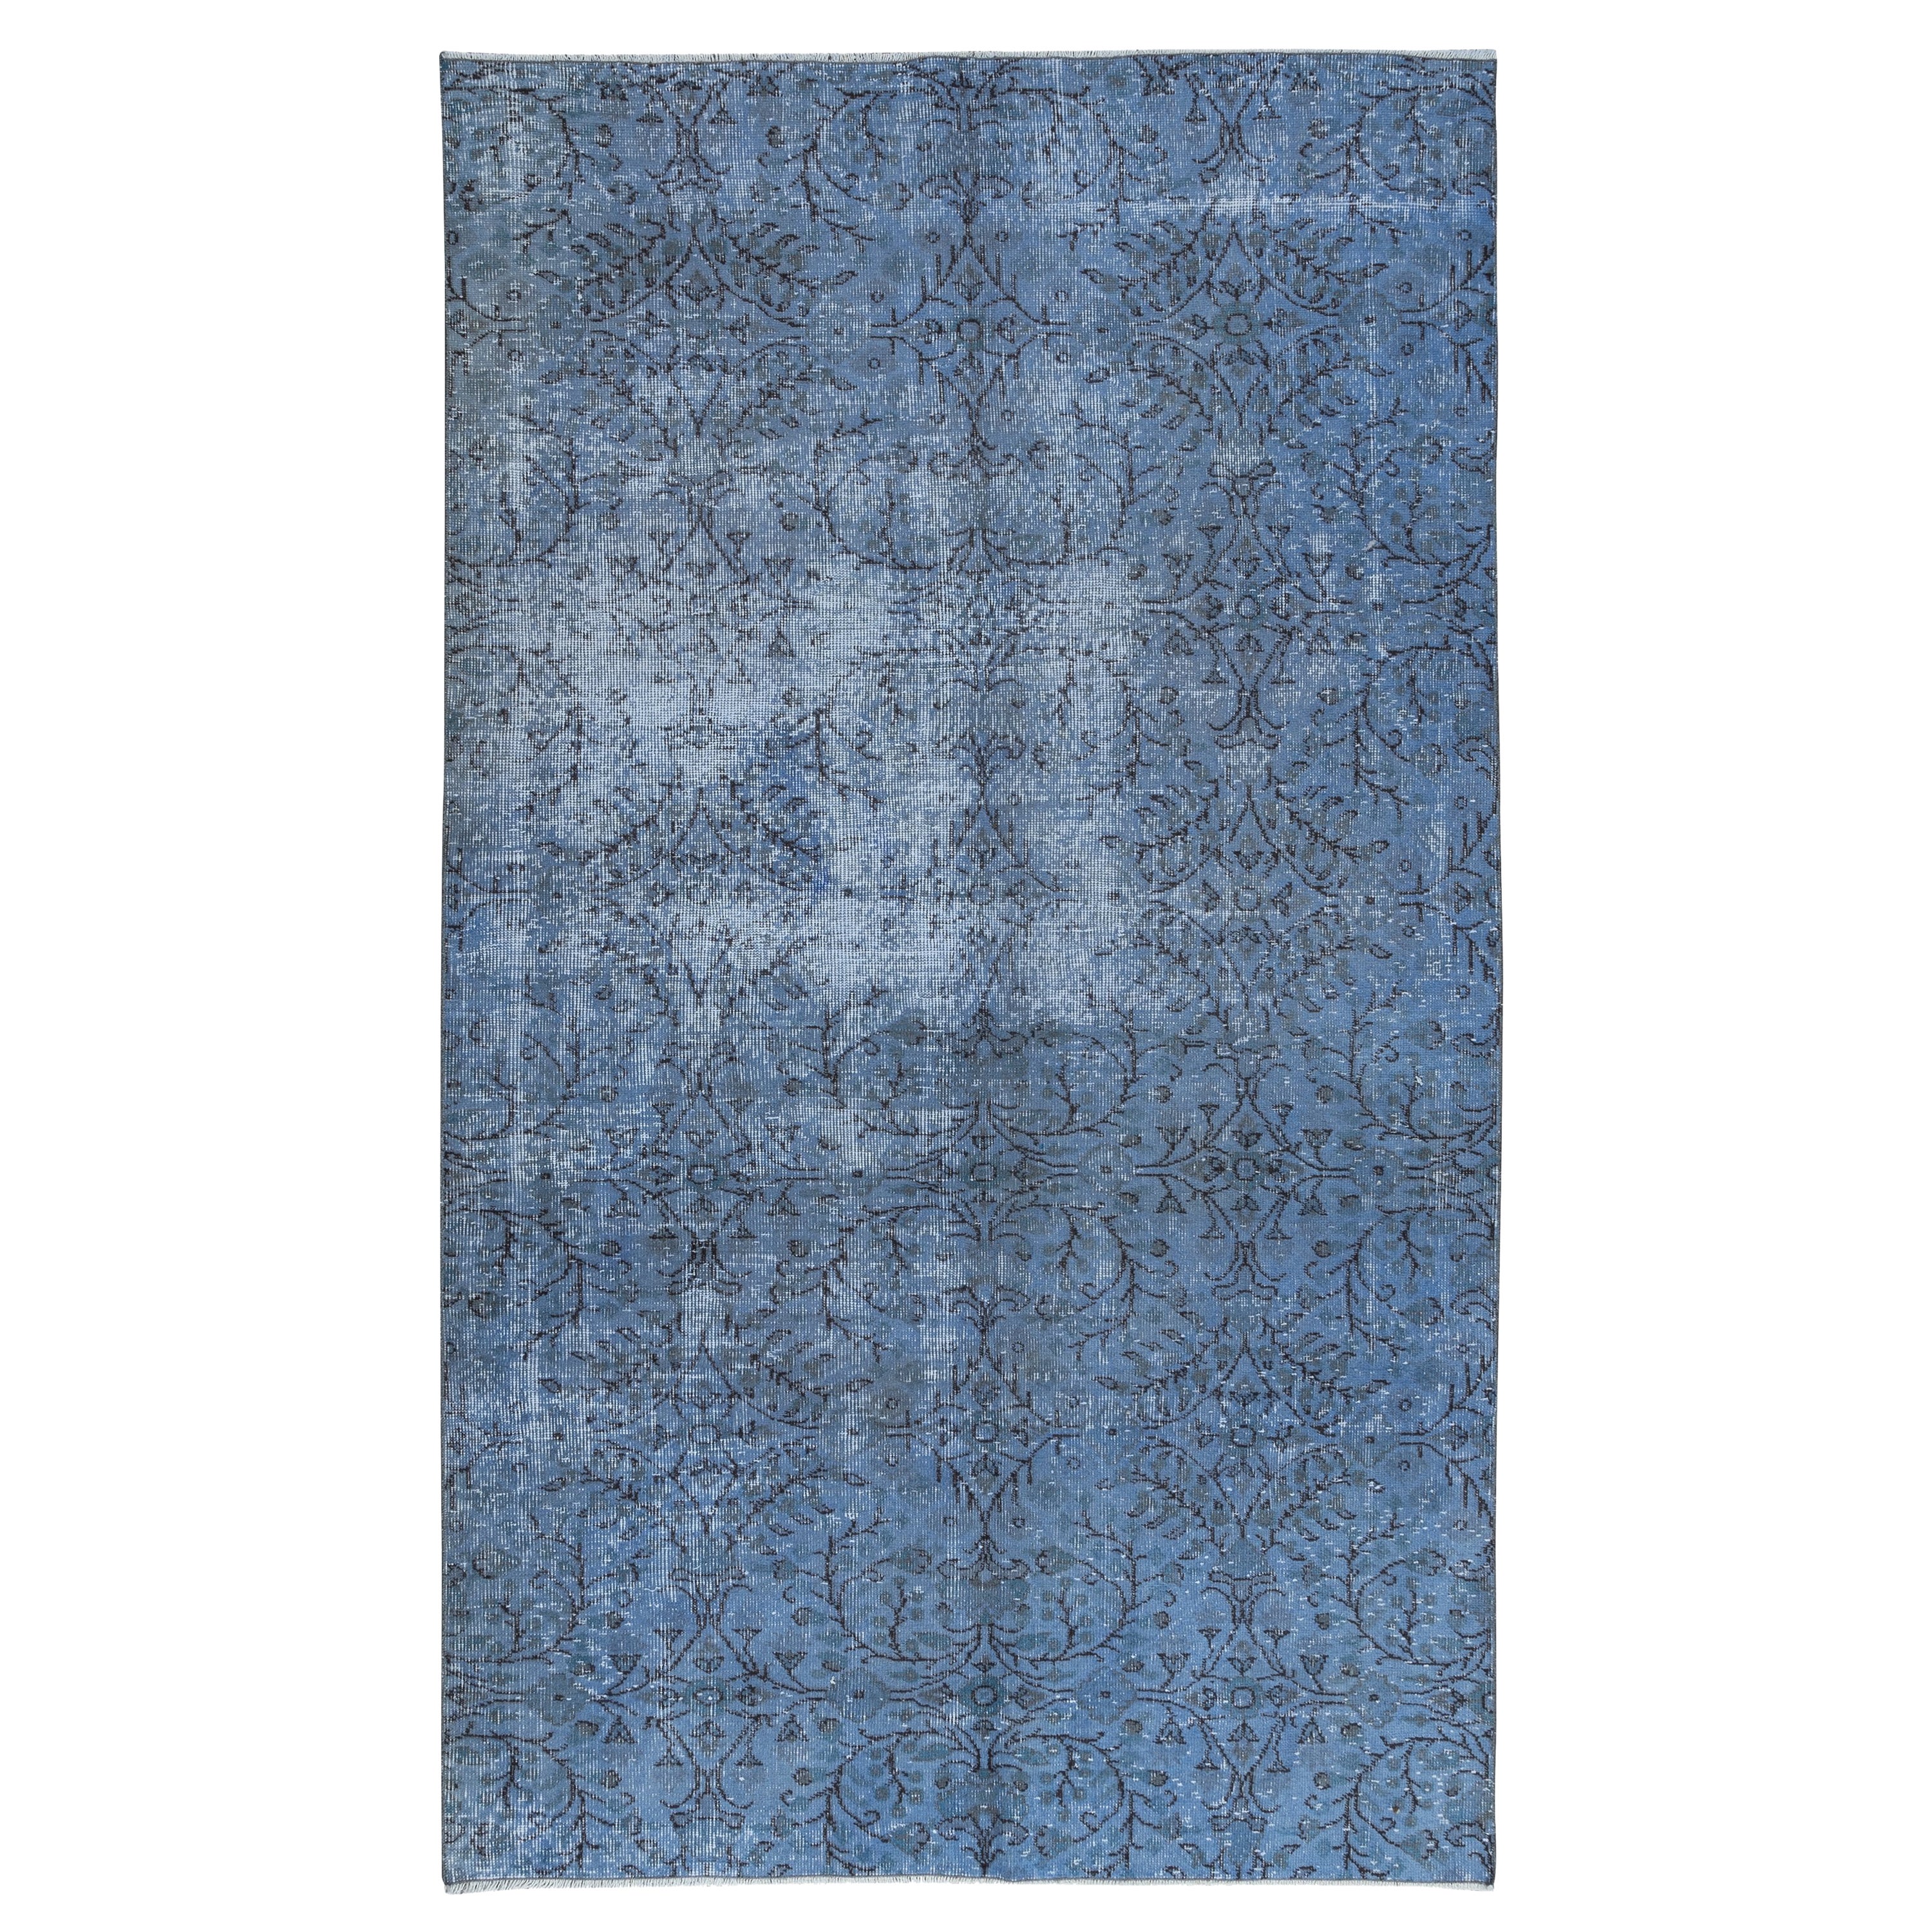 5.4x9 Ft Sky Blue Modern Area Rug, Handwoven and Handknotted in Isparta, Turkey. For Sale